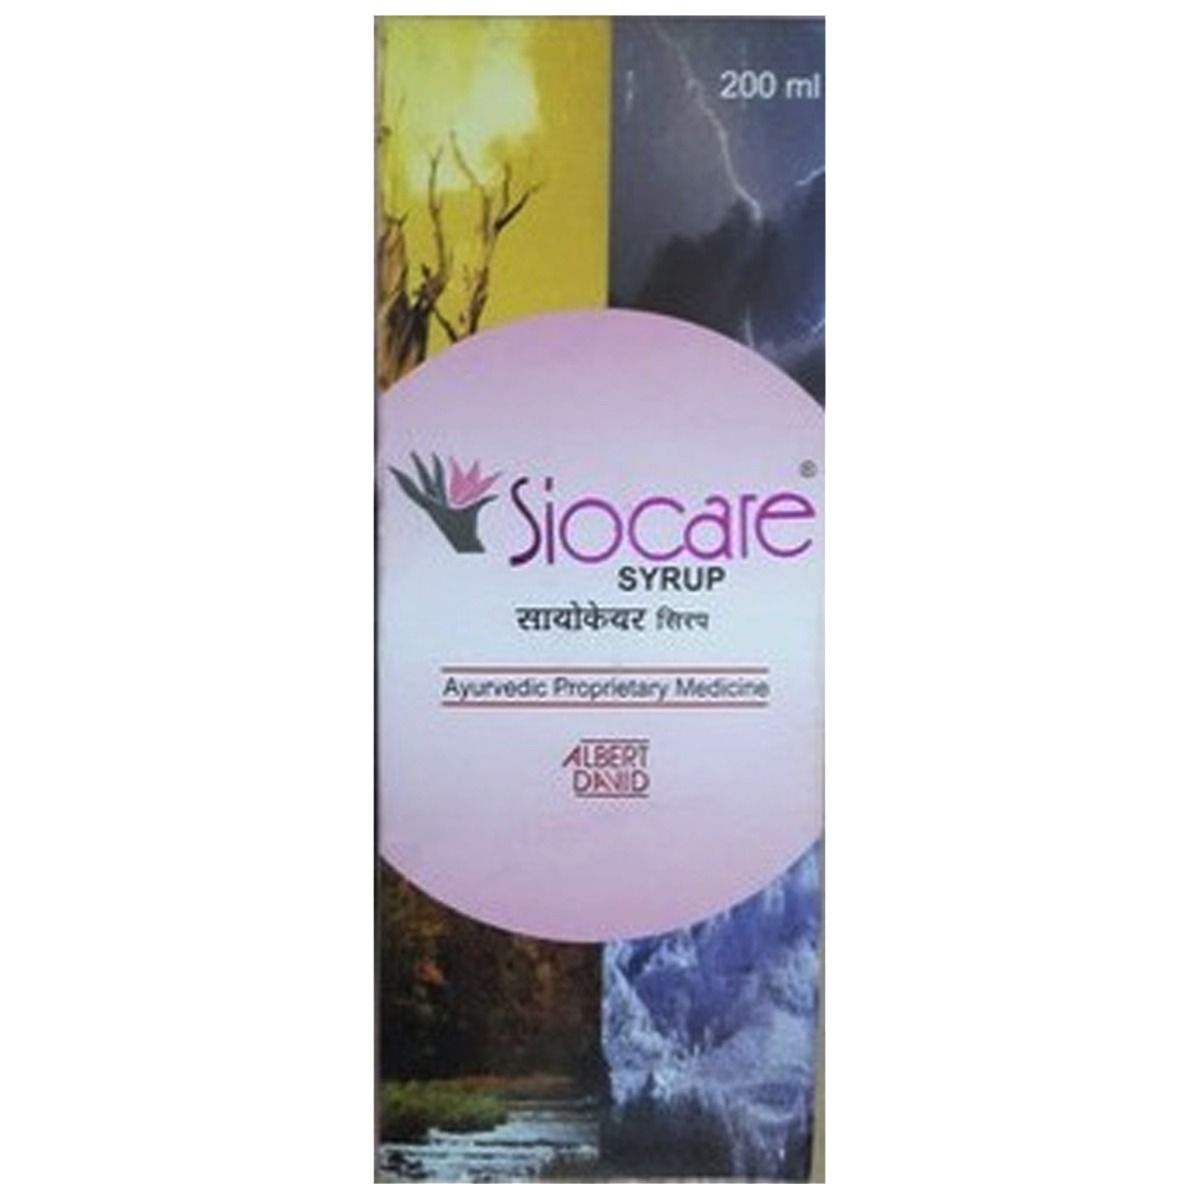 Buy Siocare Syrup, 200 ml Online